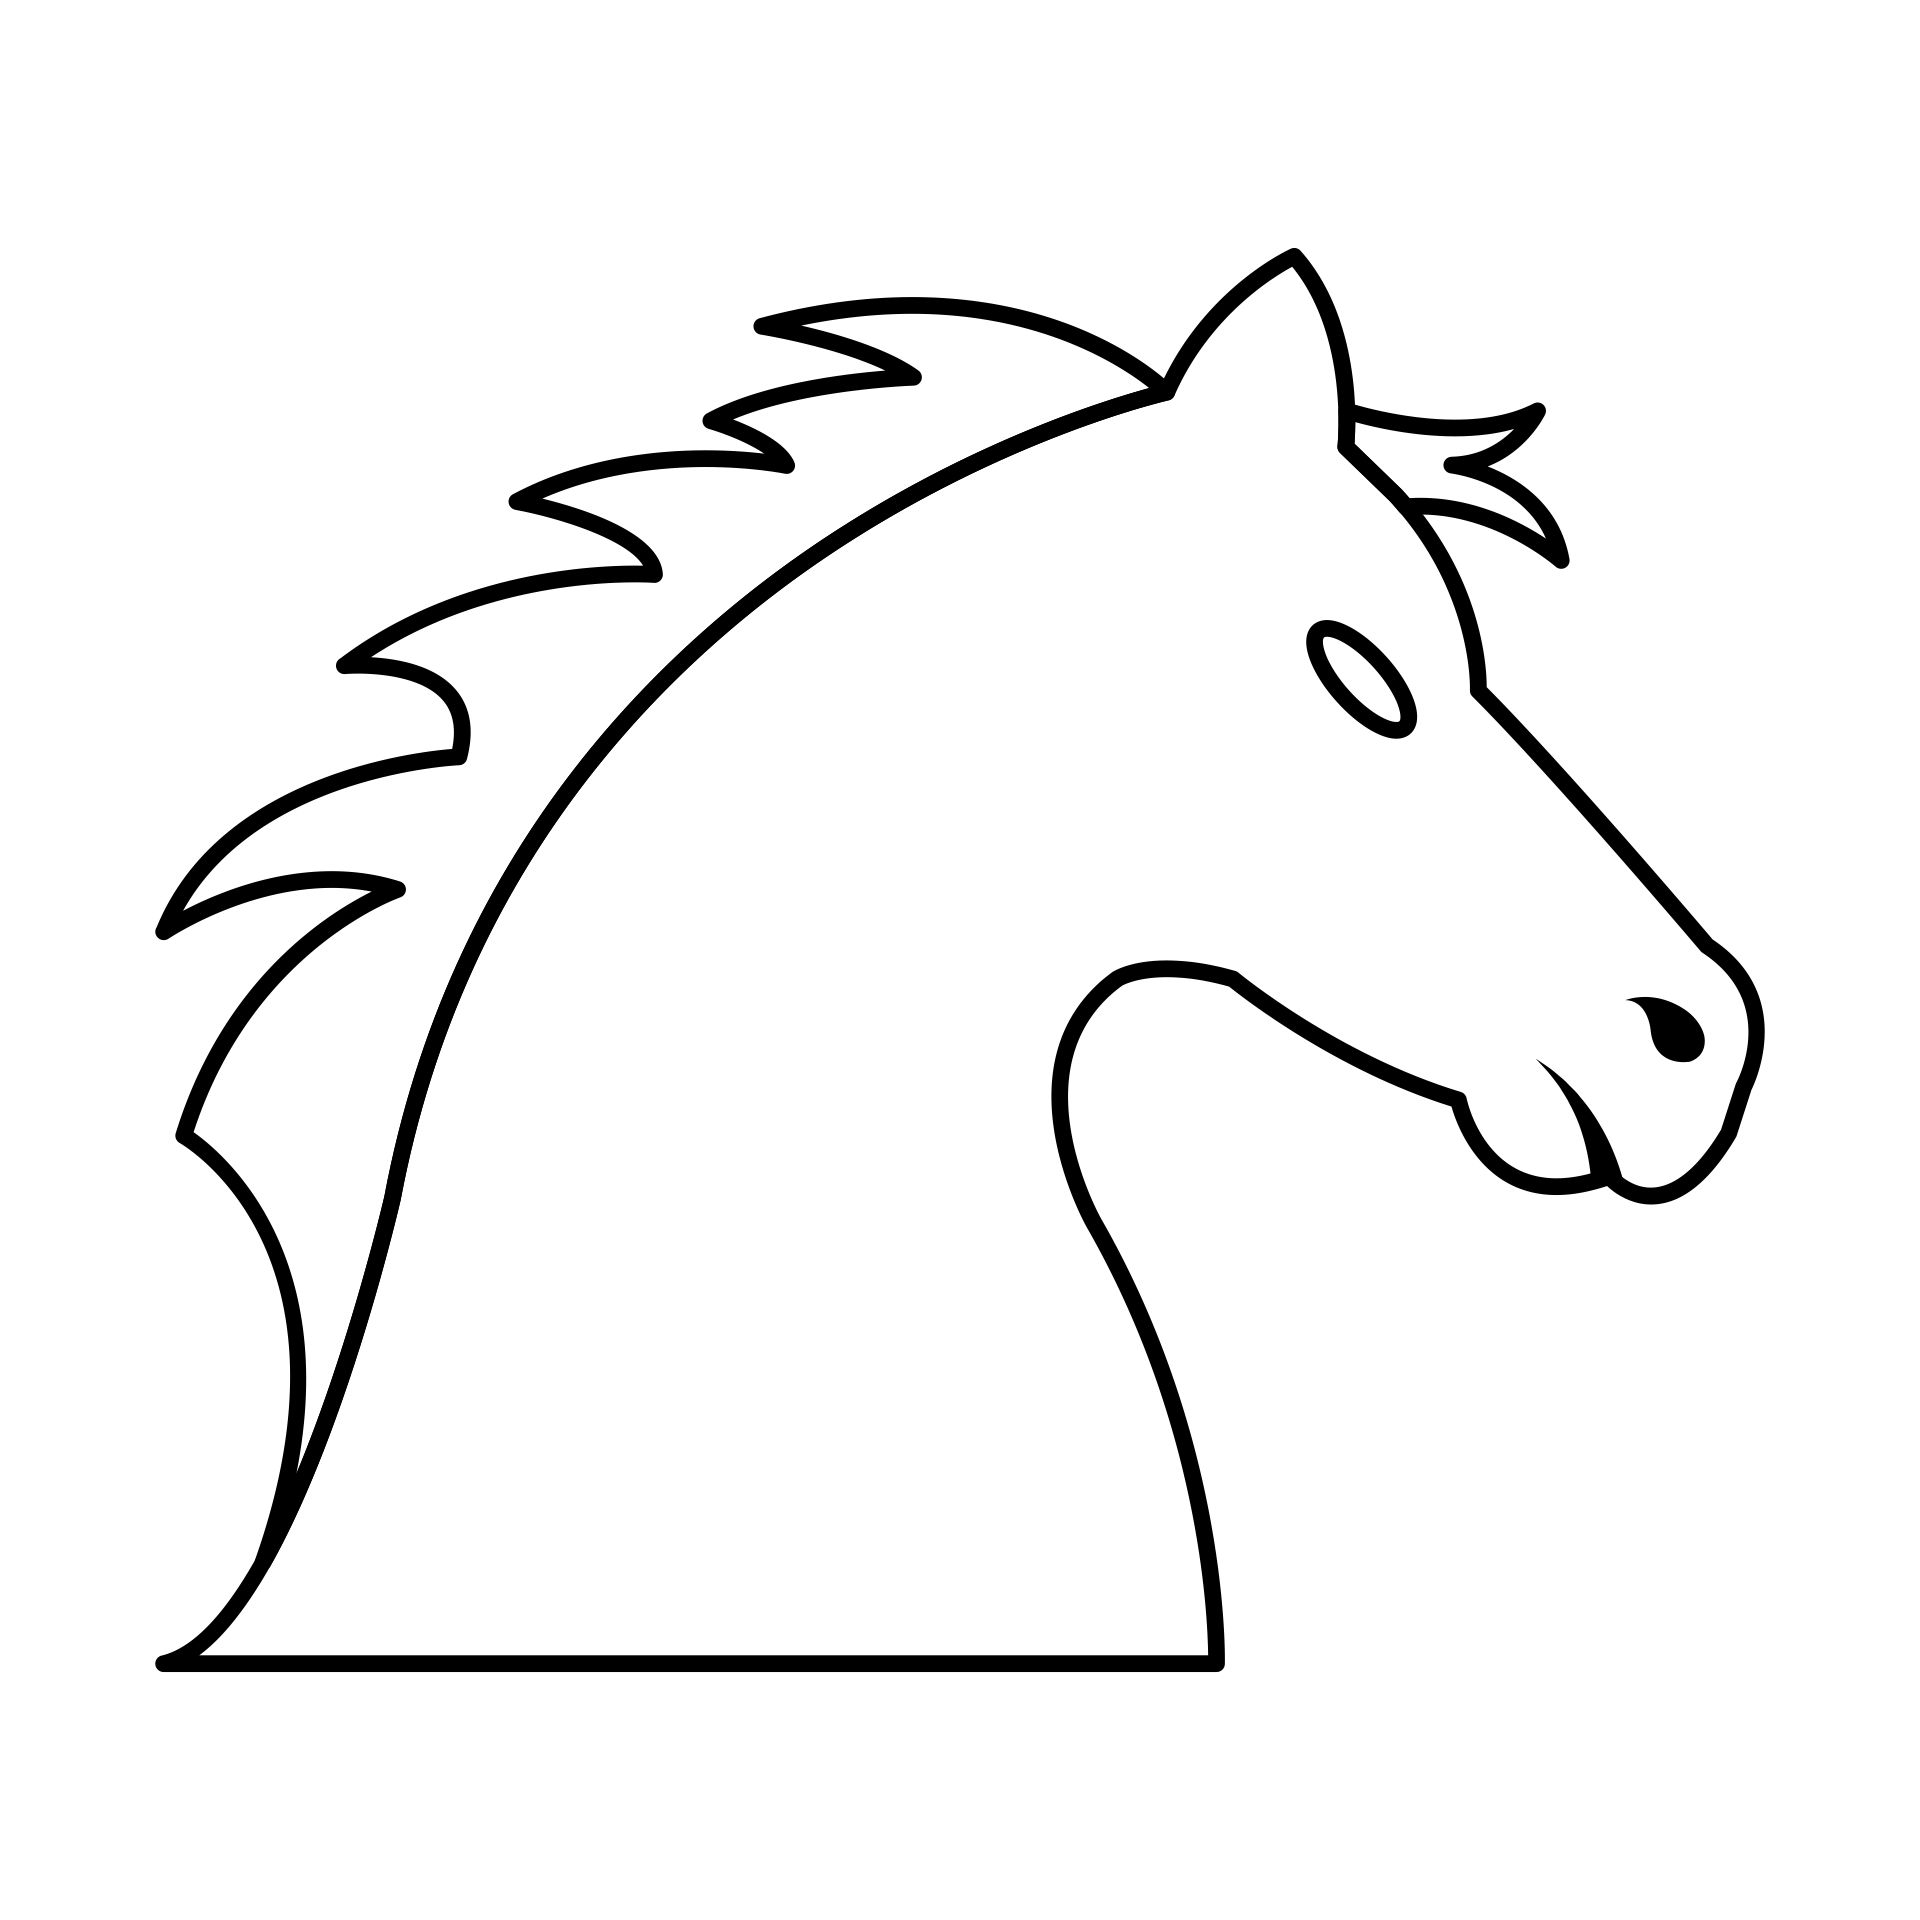 7 Best Images of Horse Head Template Printable Horse Head Cut Out